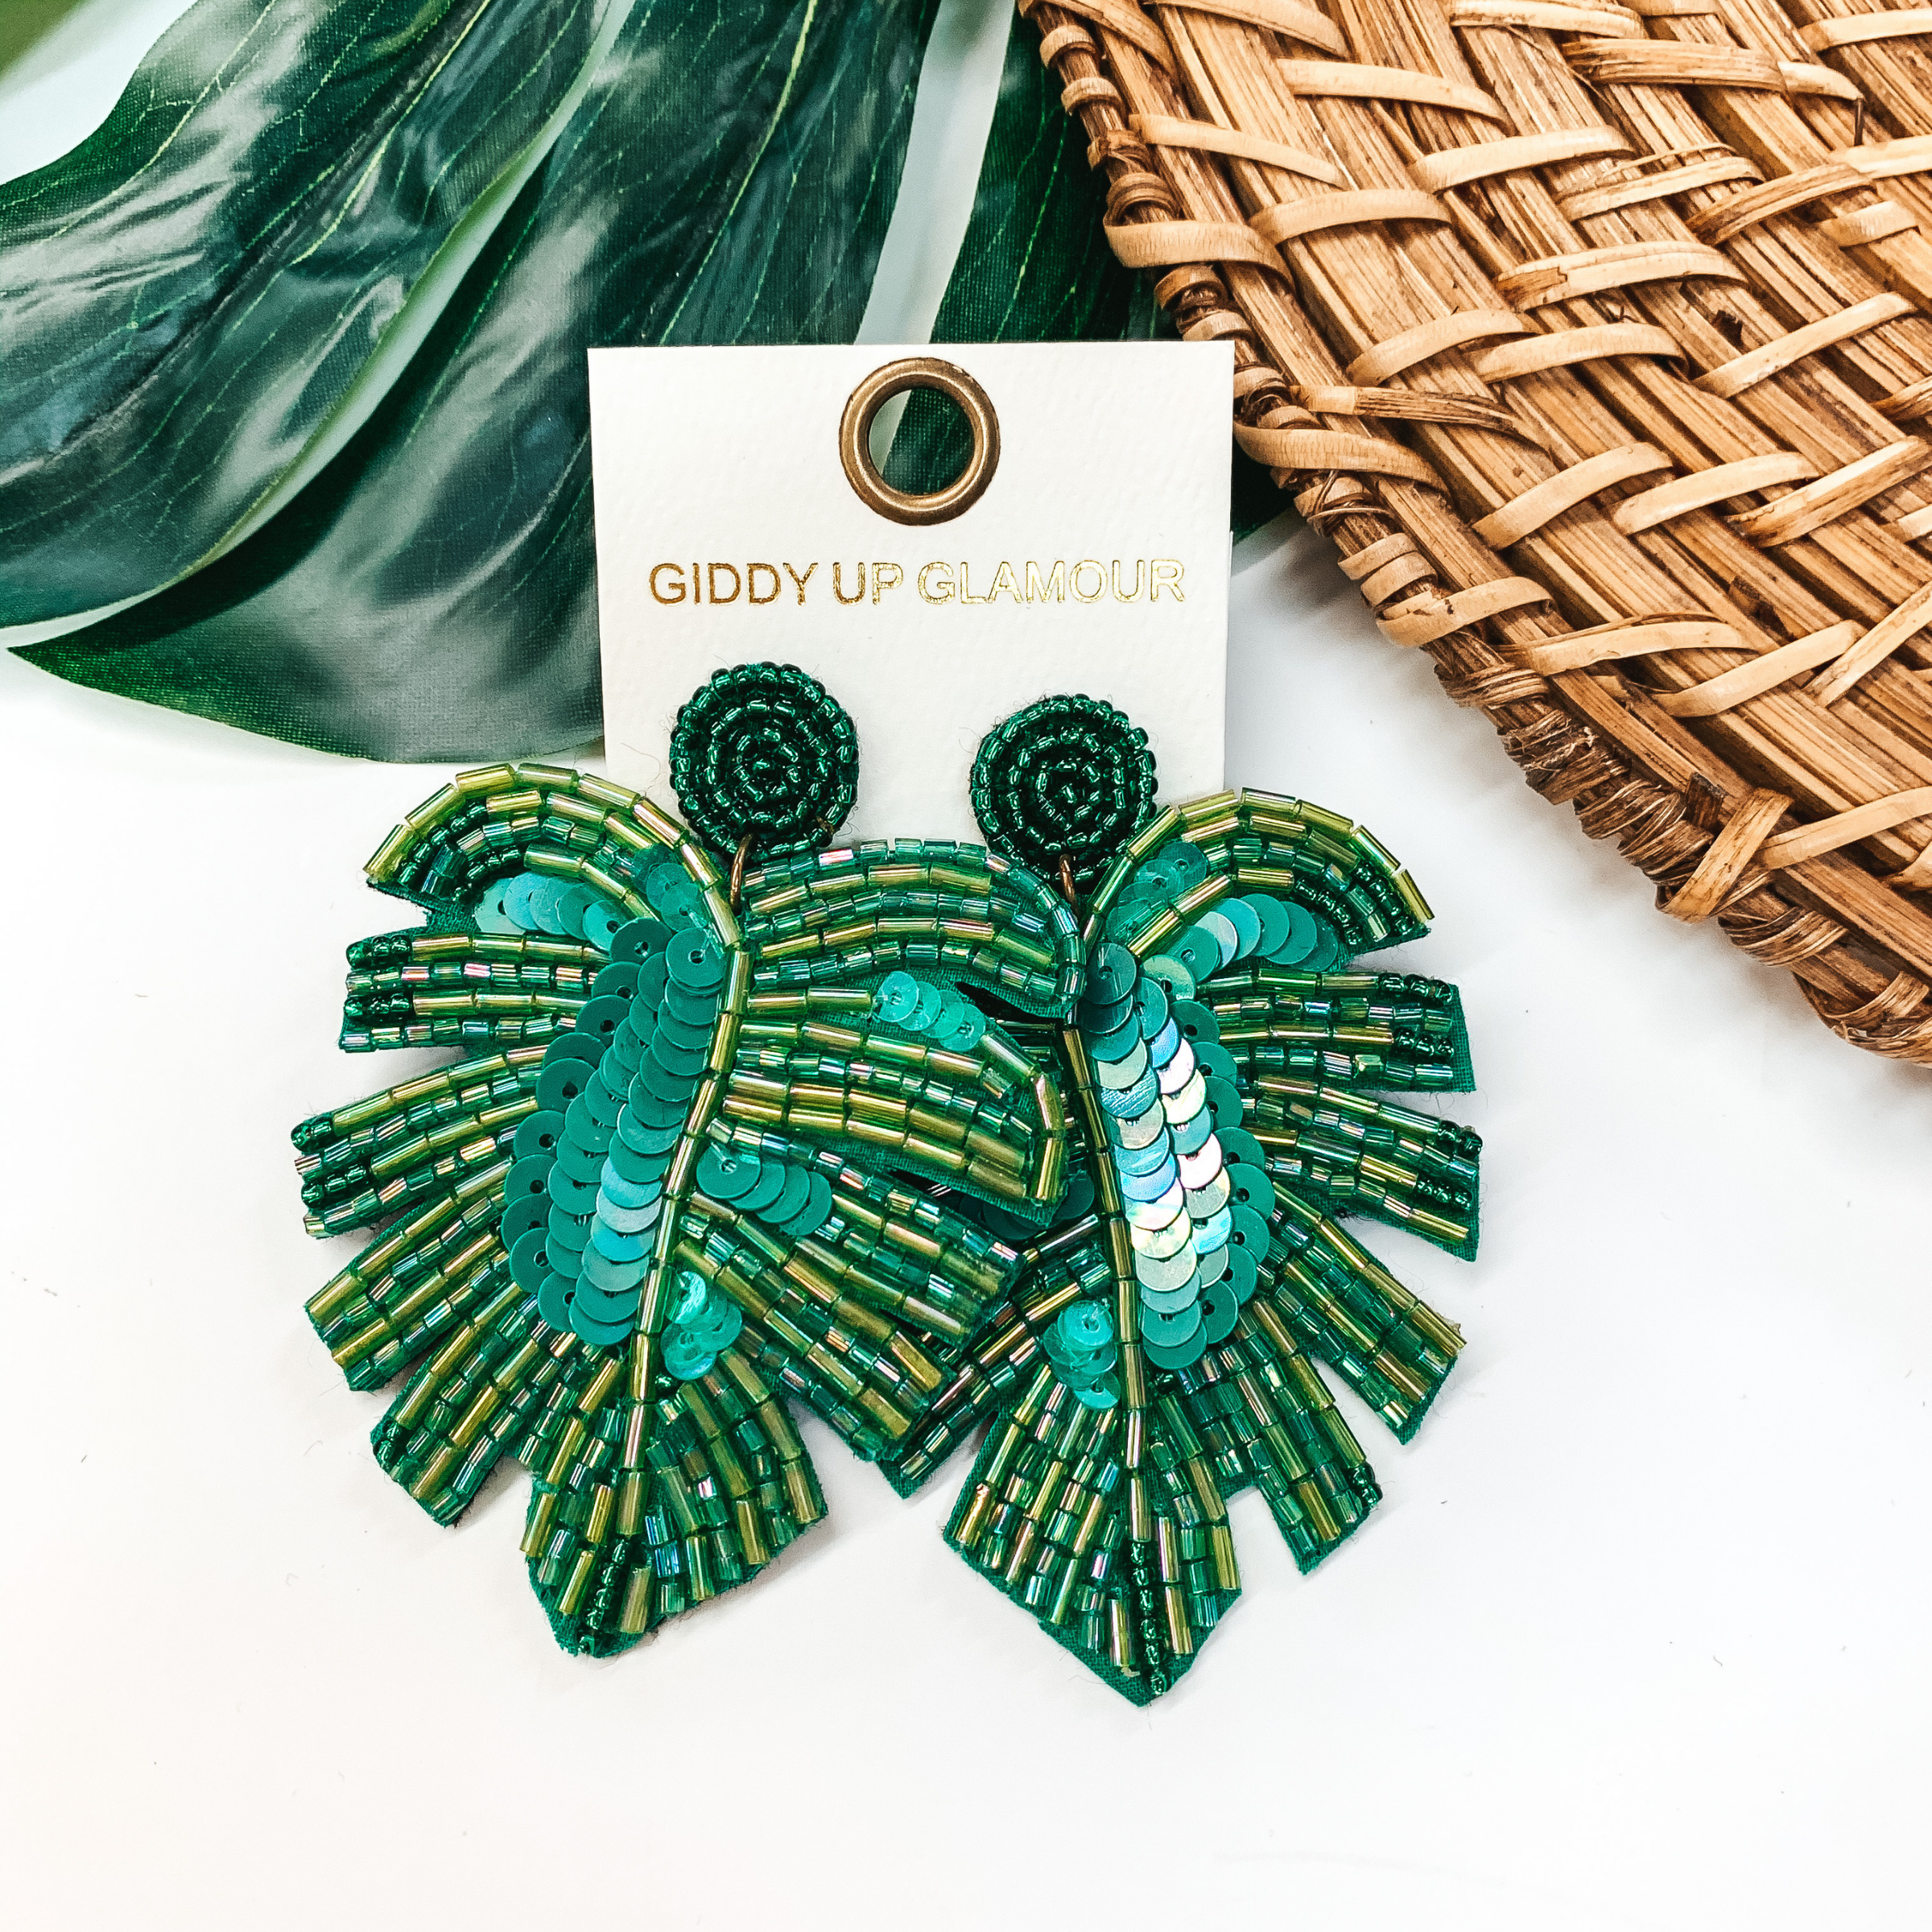 Beaded Palm Leaf Statement Earrings in Green - Giddy Up Glamour Boutique